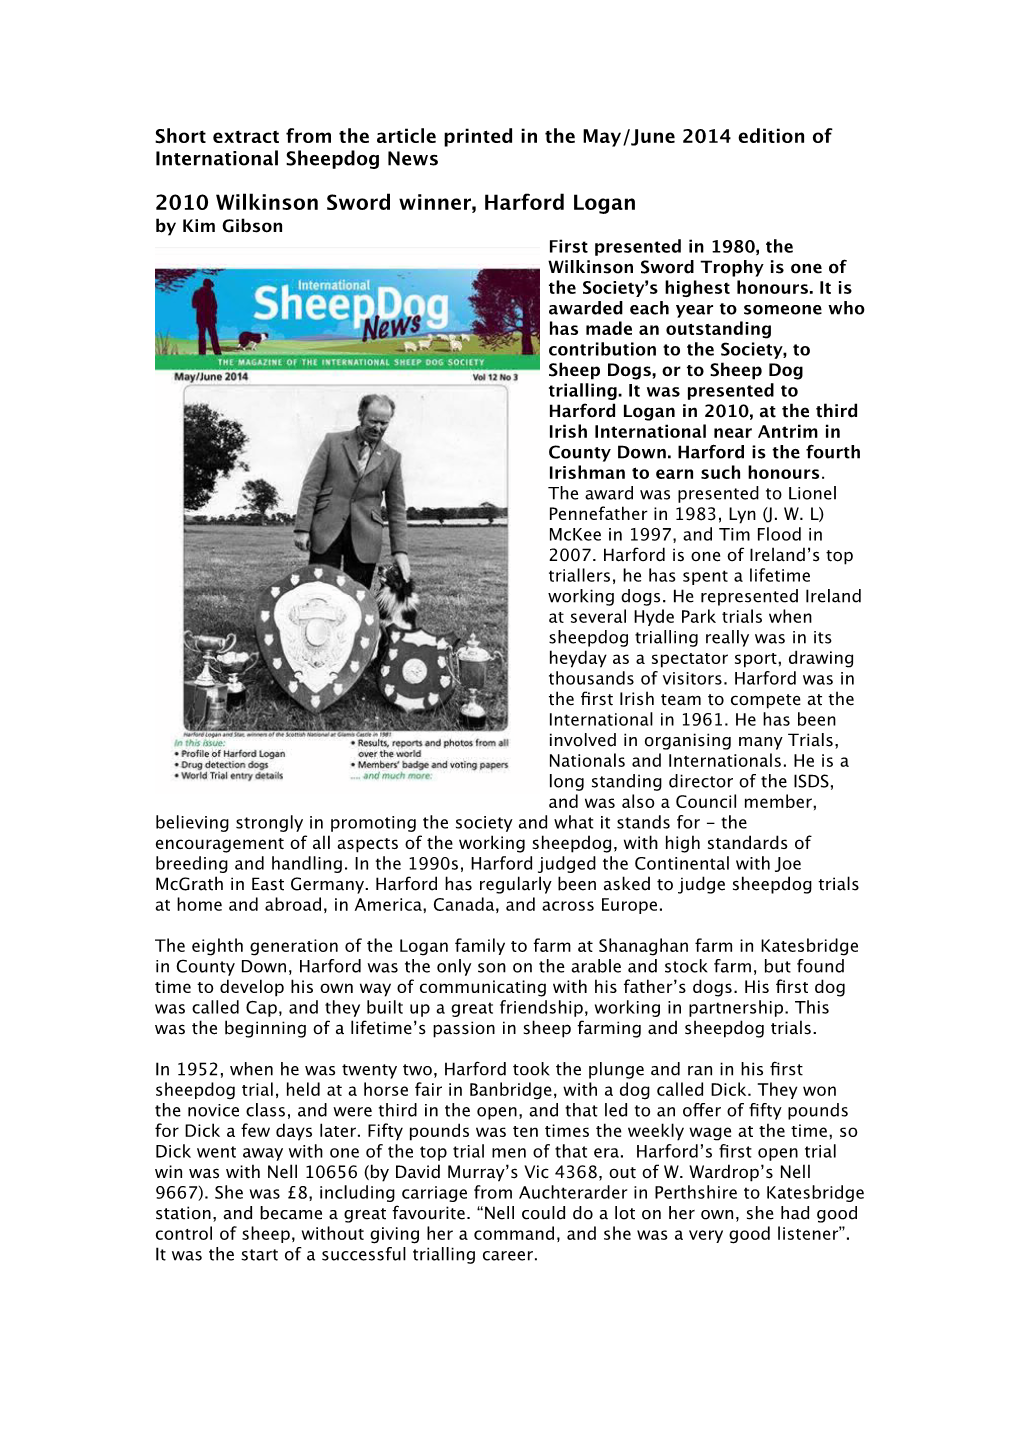 Short Extract from the Article Printed in the May/June 2014 Edition of International Sheepdog News